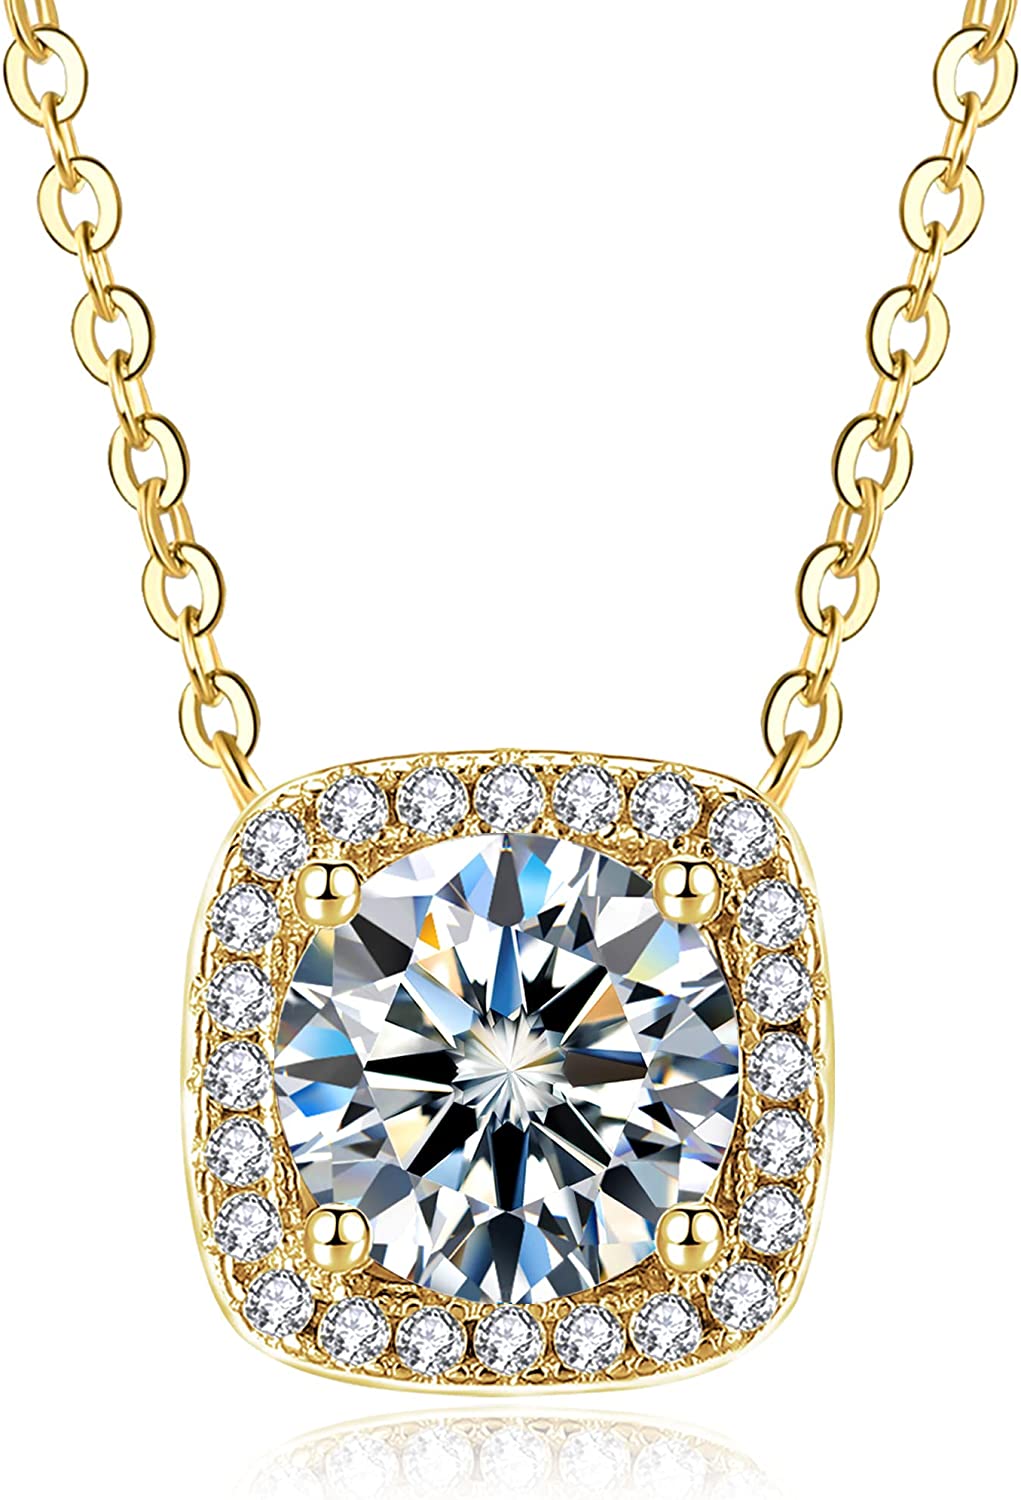 Moissanite Necklaces 1ct Pendant Diamond 18K 925 Sterling Silver 16in with Certificate Authenticity - Wowshow Jewelry